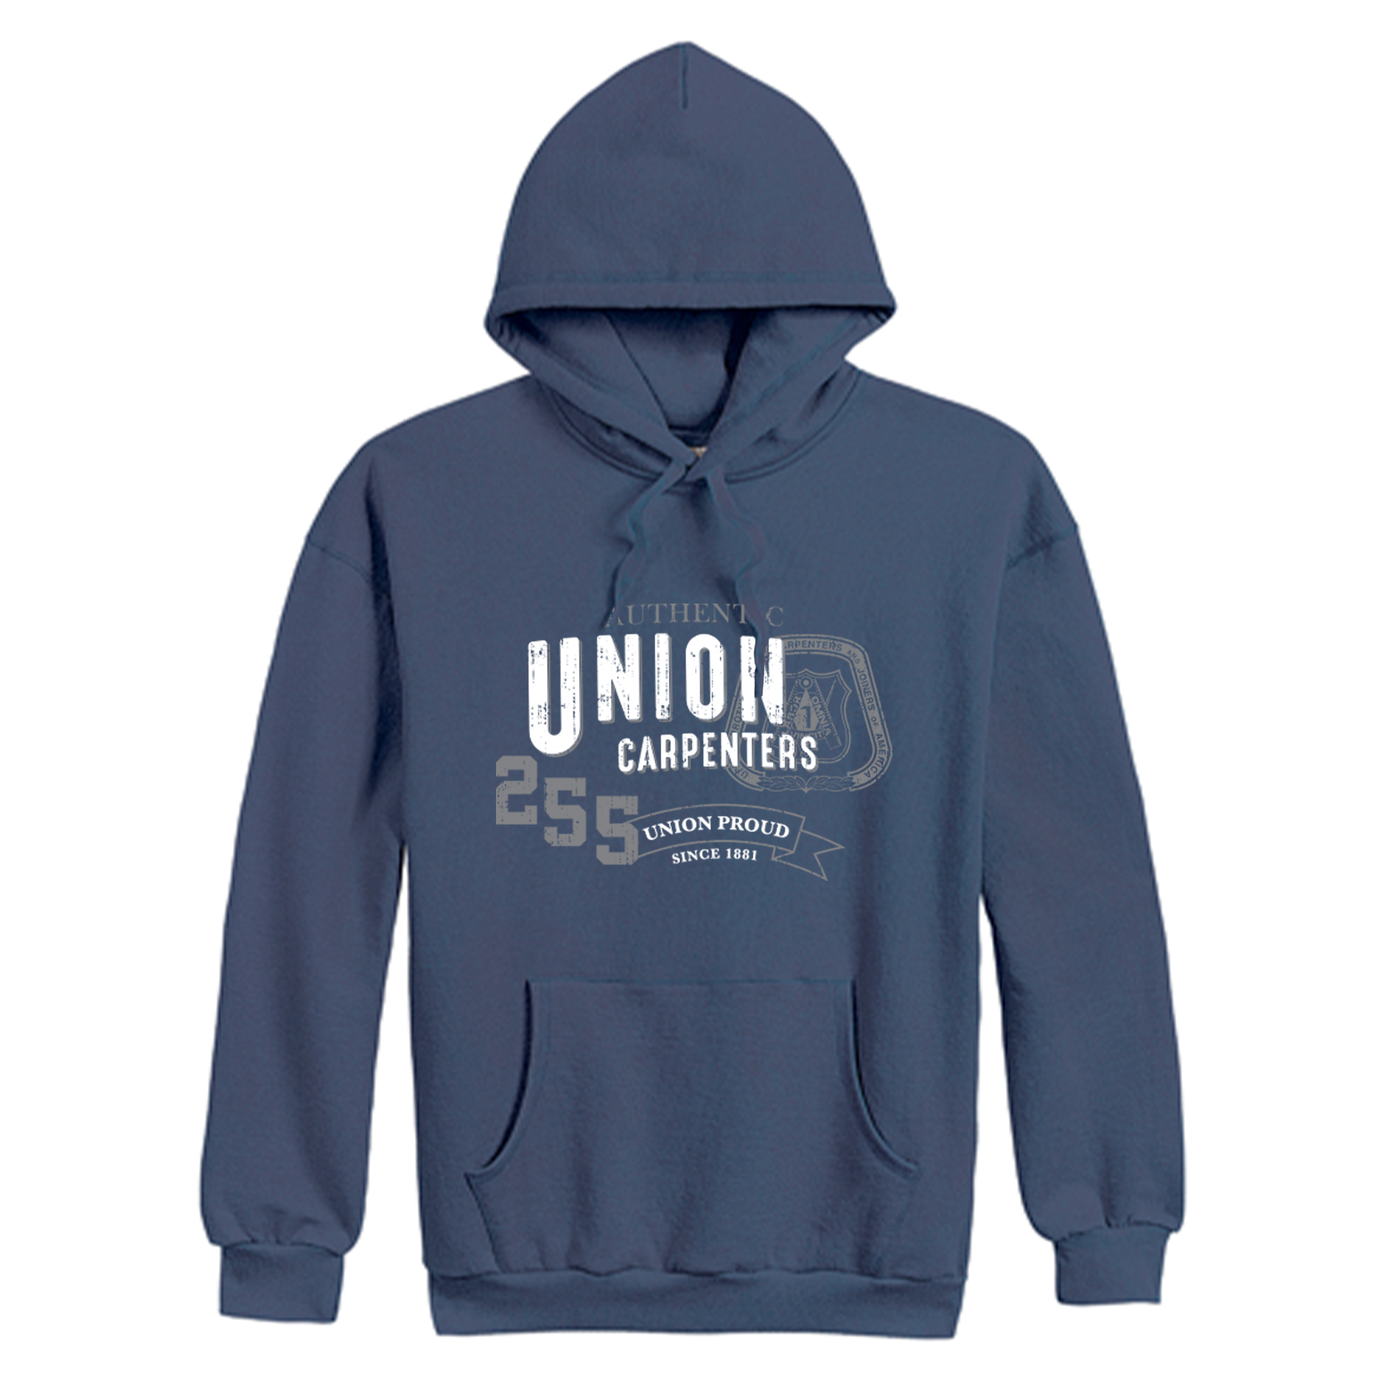 Campus - Union Made Navy Hoodie